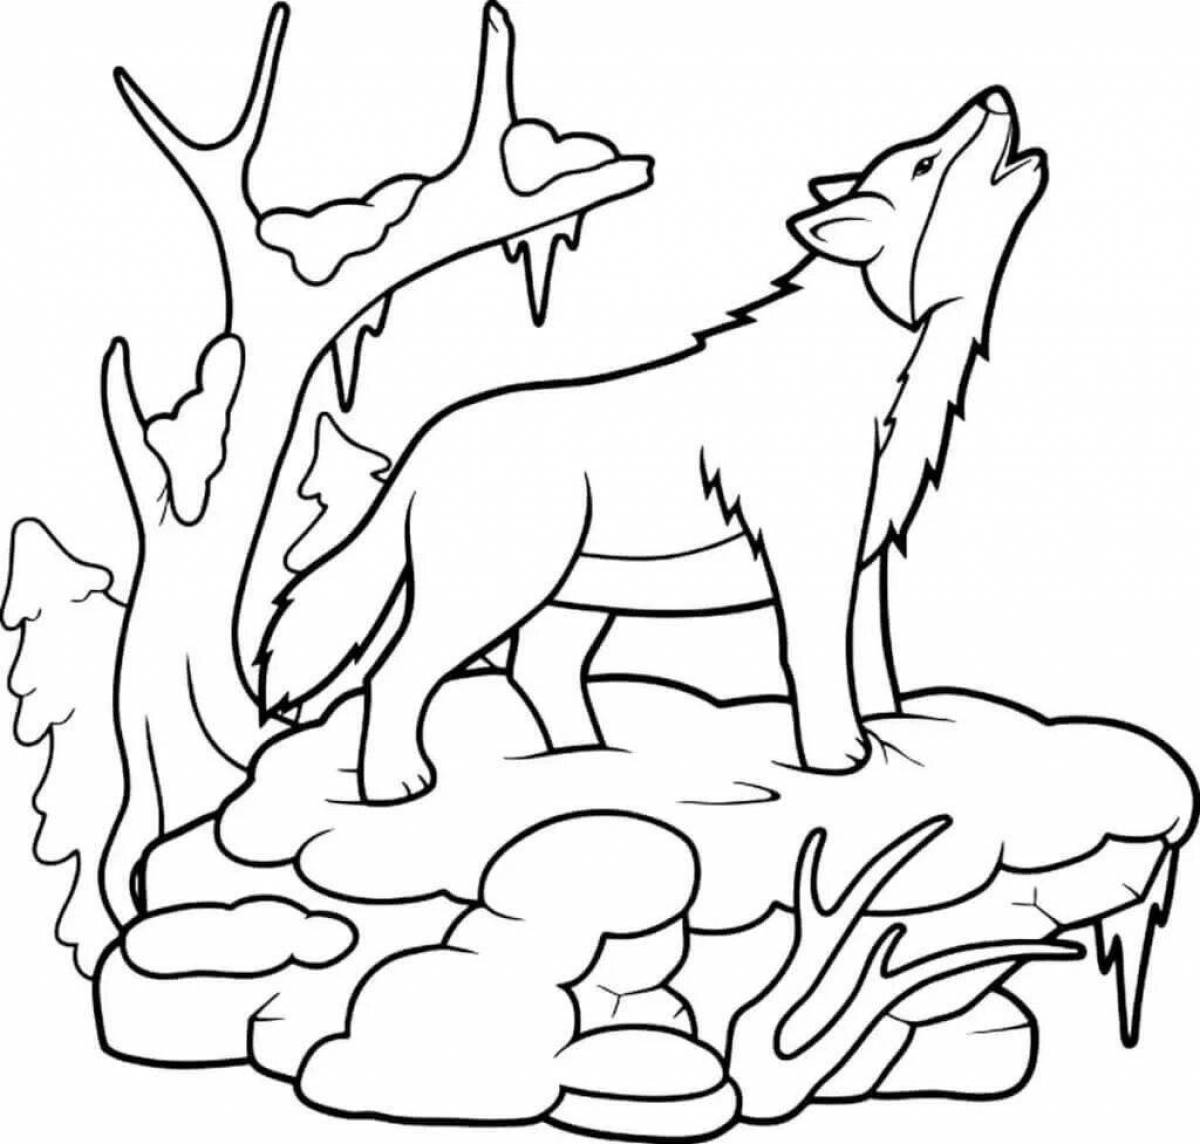 Great winter animal coloring book for kids